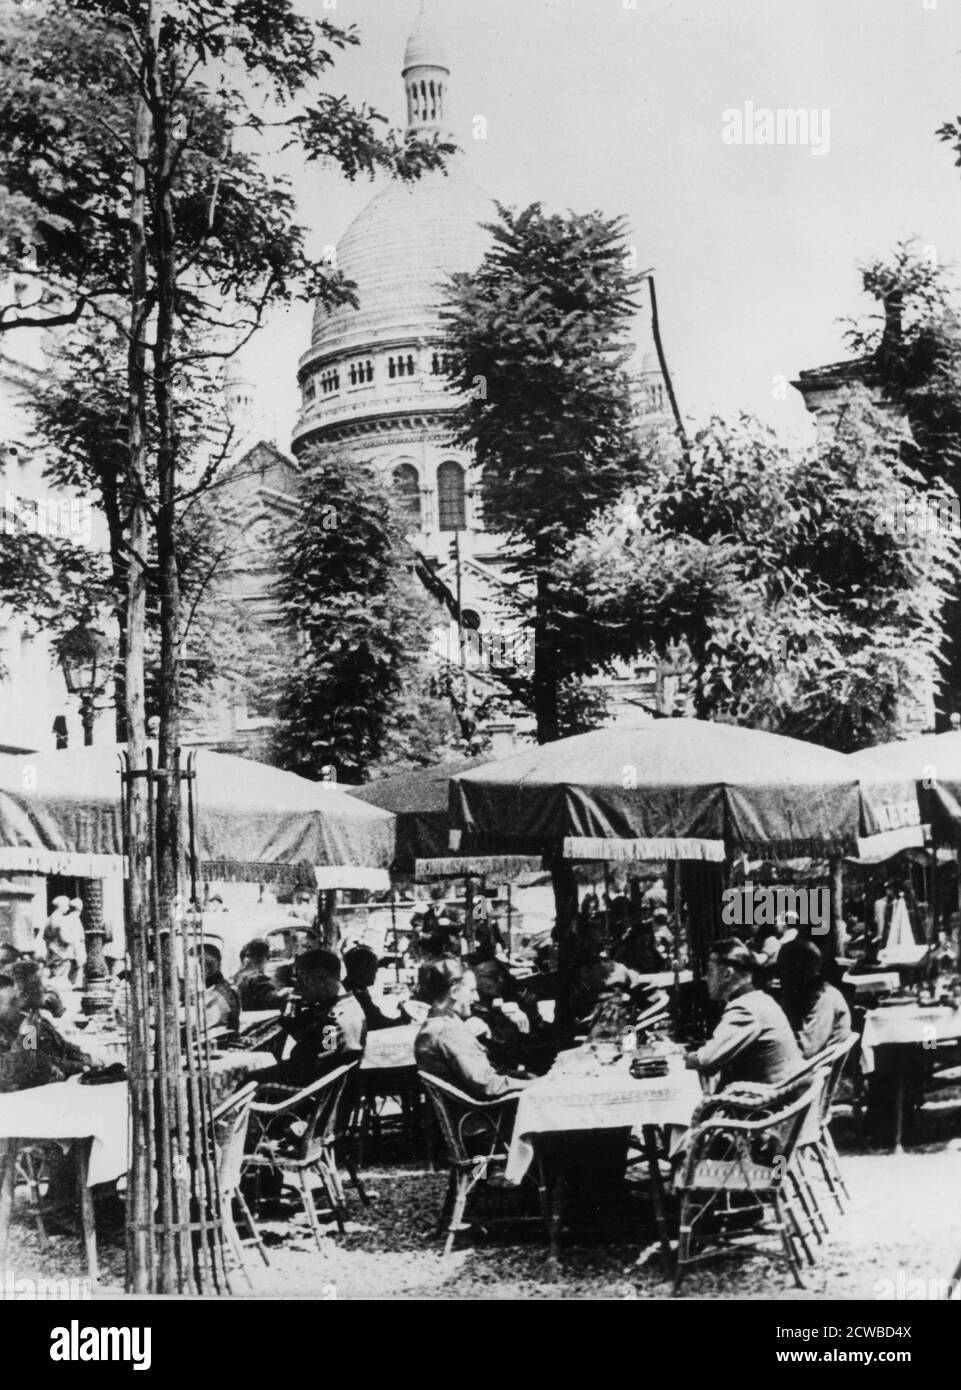 German soldiers relaxing outside a restaurant in Montmartre, Paris, June 1941. Occupied Paris was a desirable posting for members of the German military during World War II. The photographer is unknown. Stock Photo